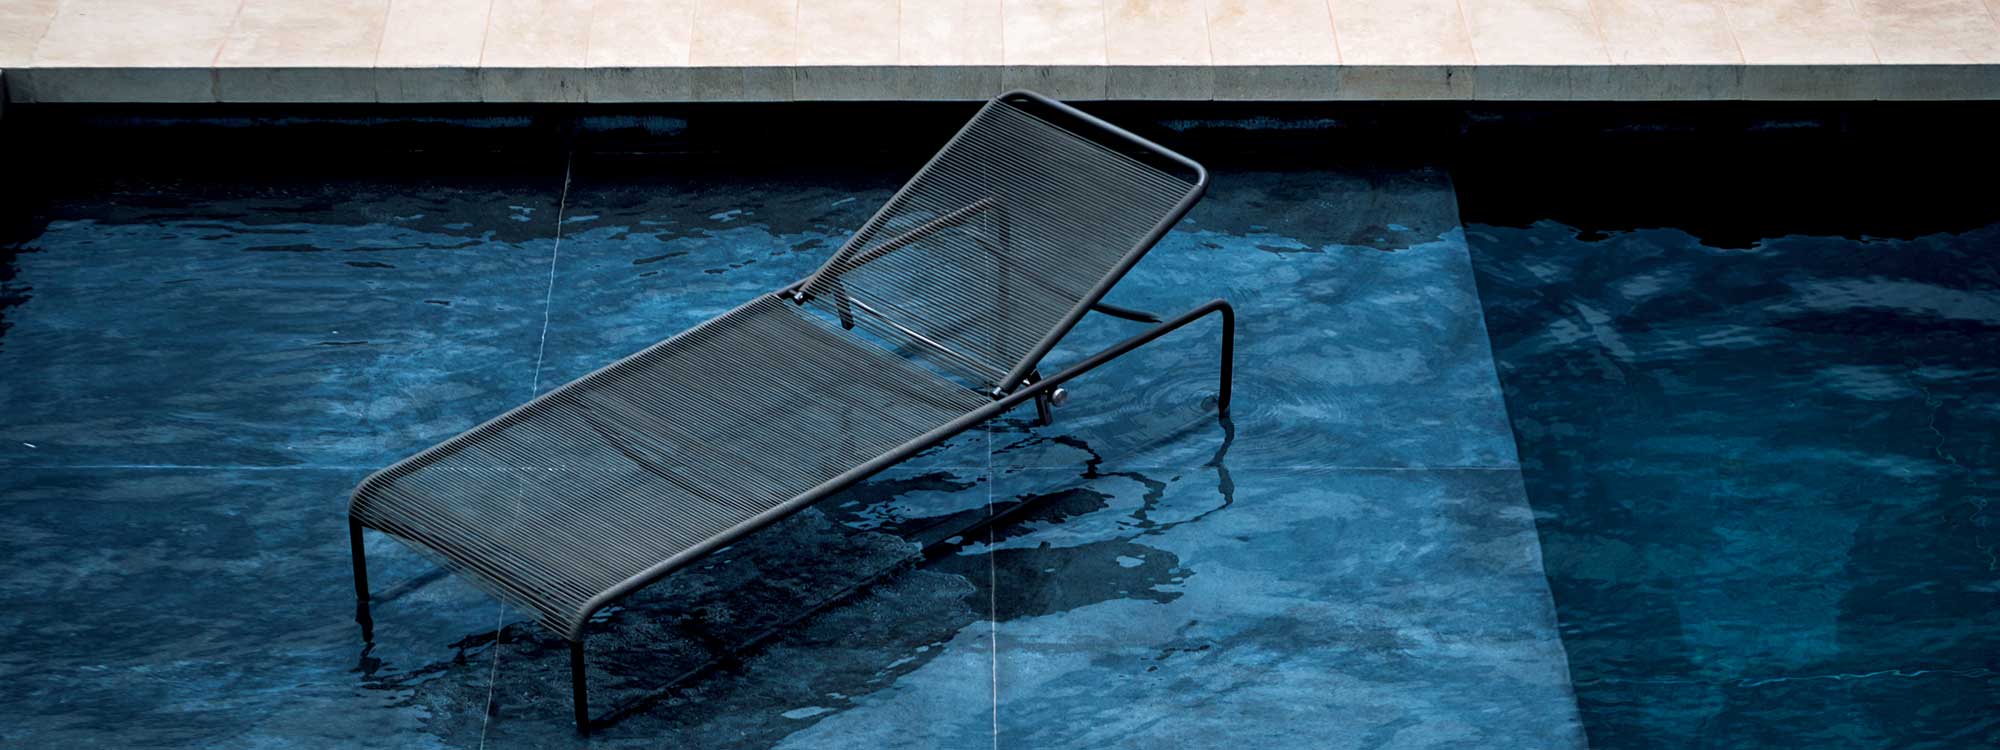 Image of RODA Harp black sun lounger sat in shallow water of a modern swimming pool